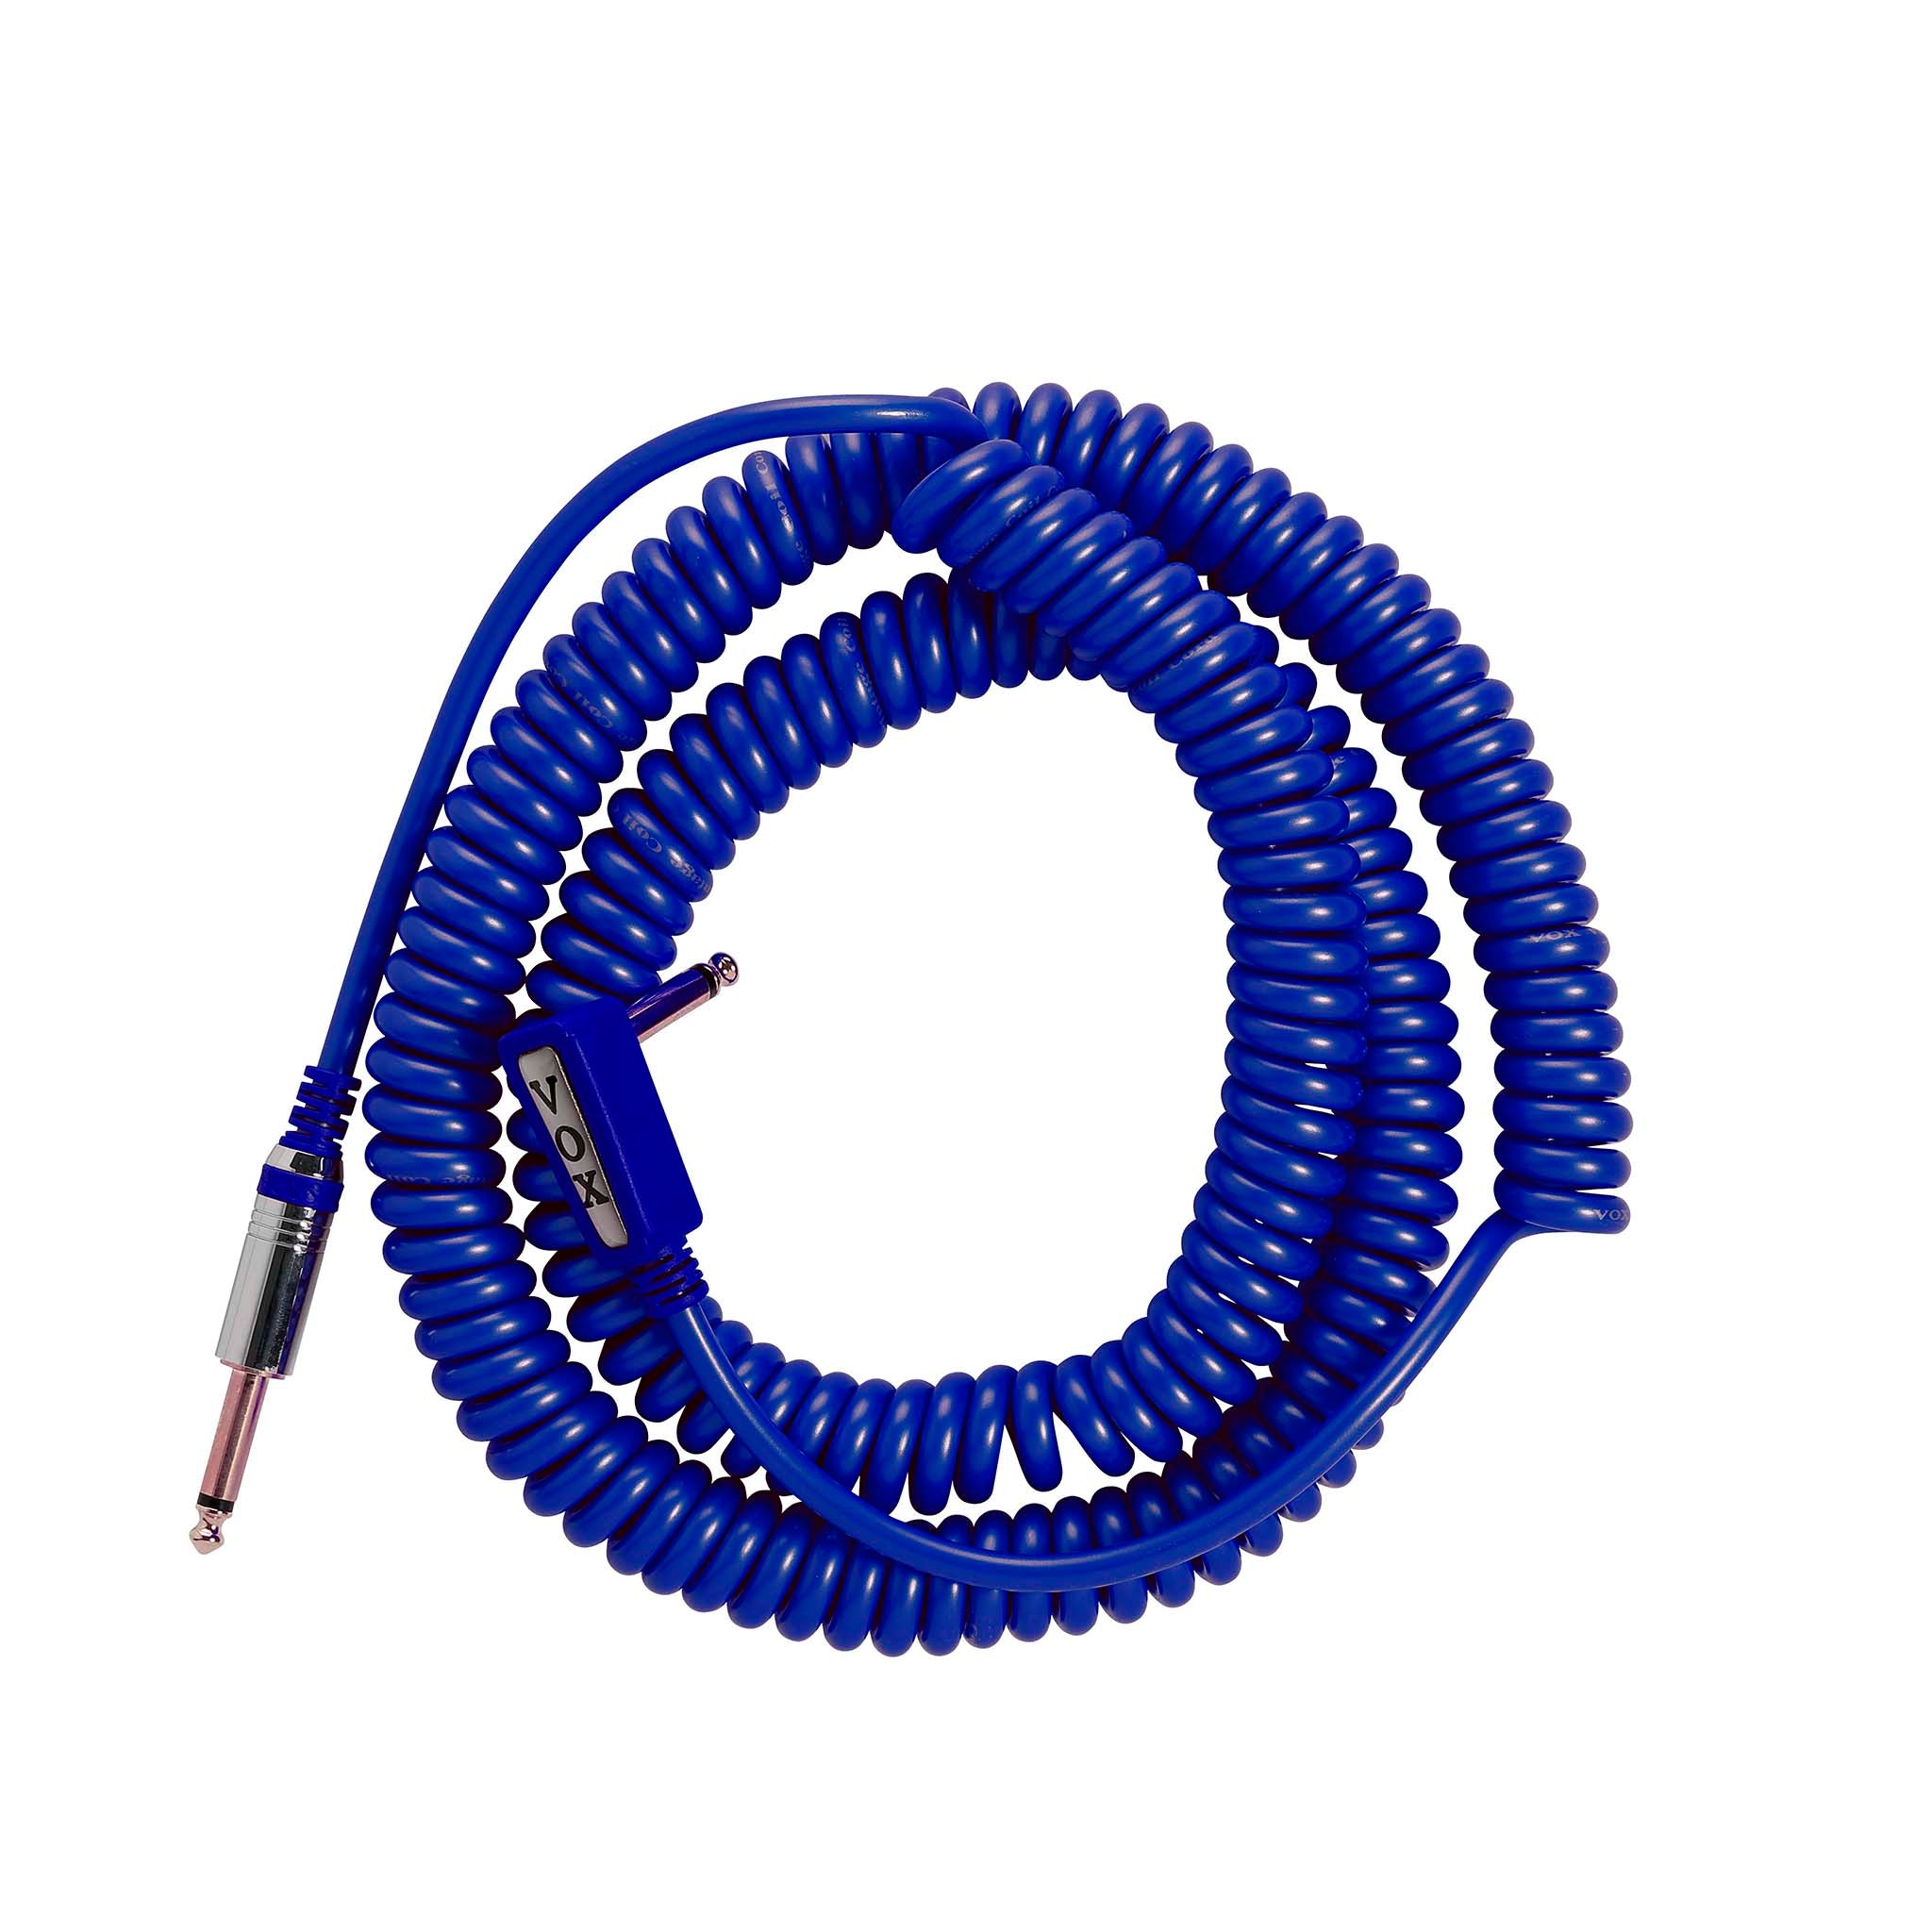 Spiral Cable - Coiled Cables Latest Price, Manufacturers & Suppliers